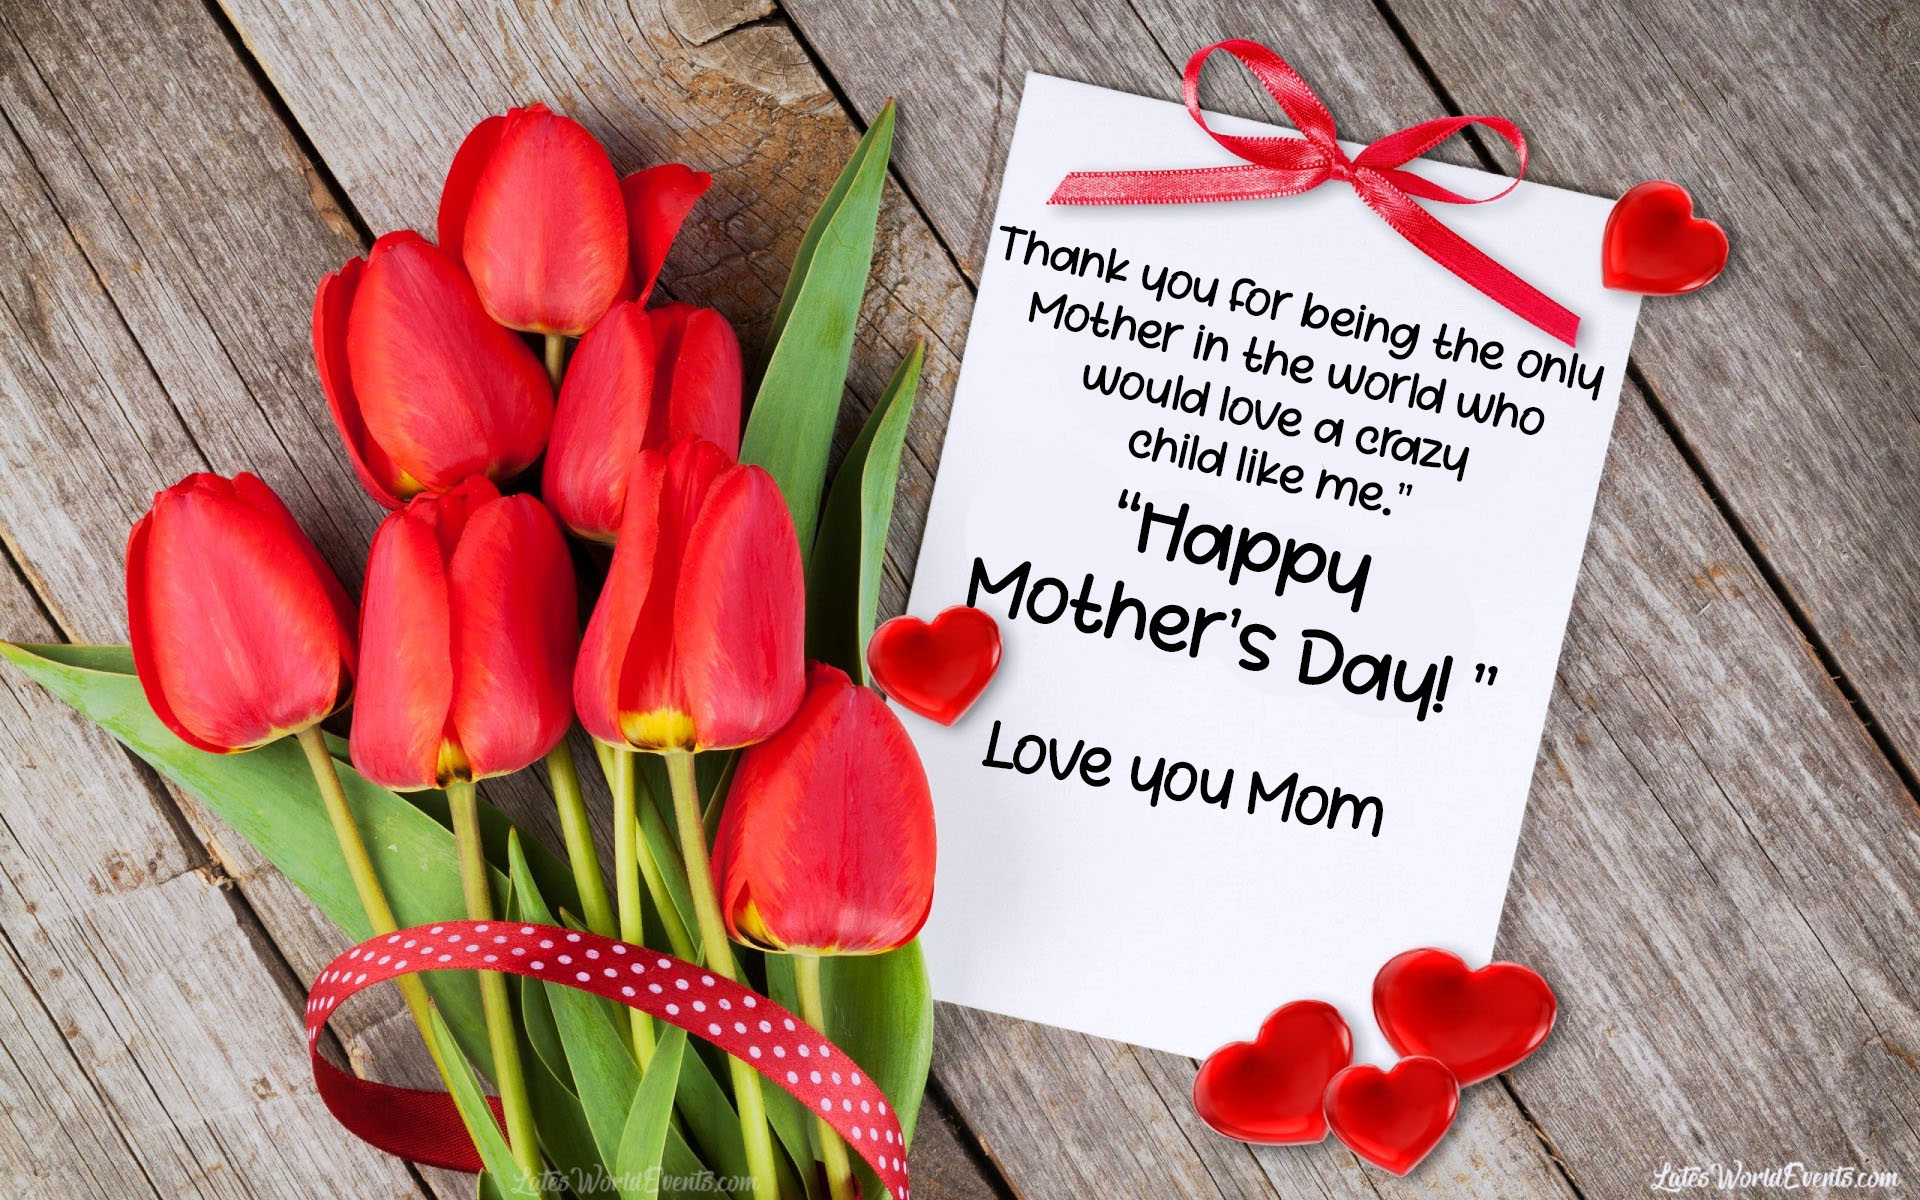 Mothers Day Quotes Messages And Images Download 